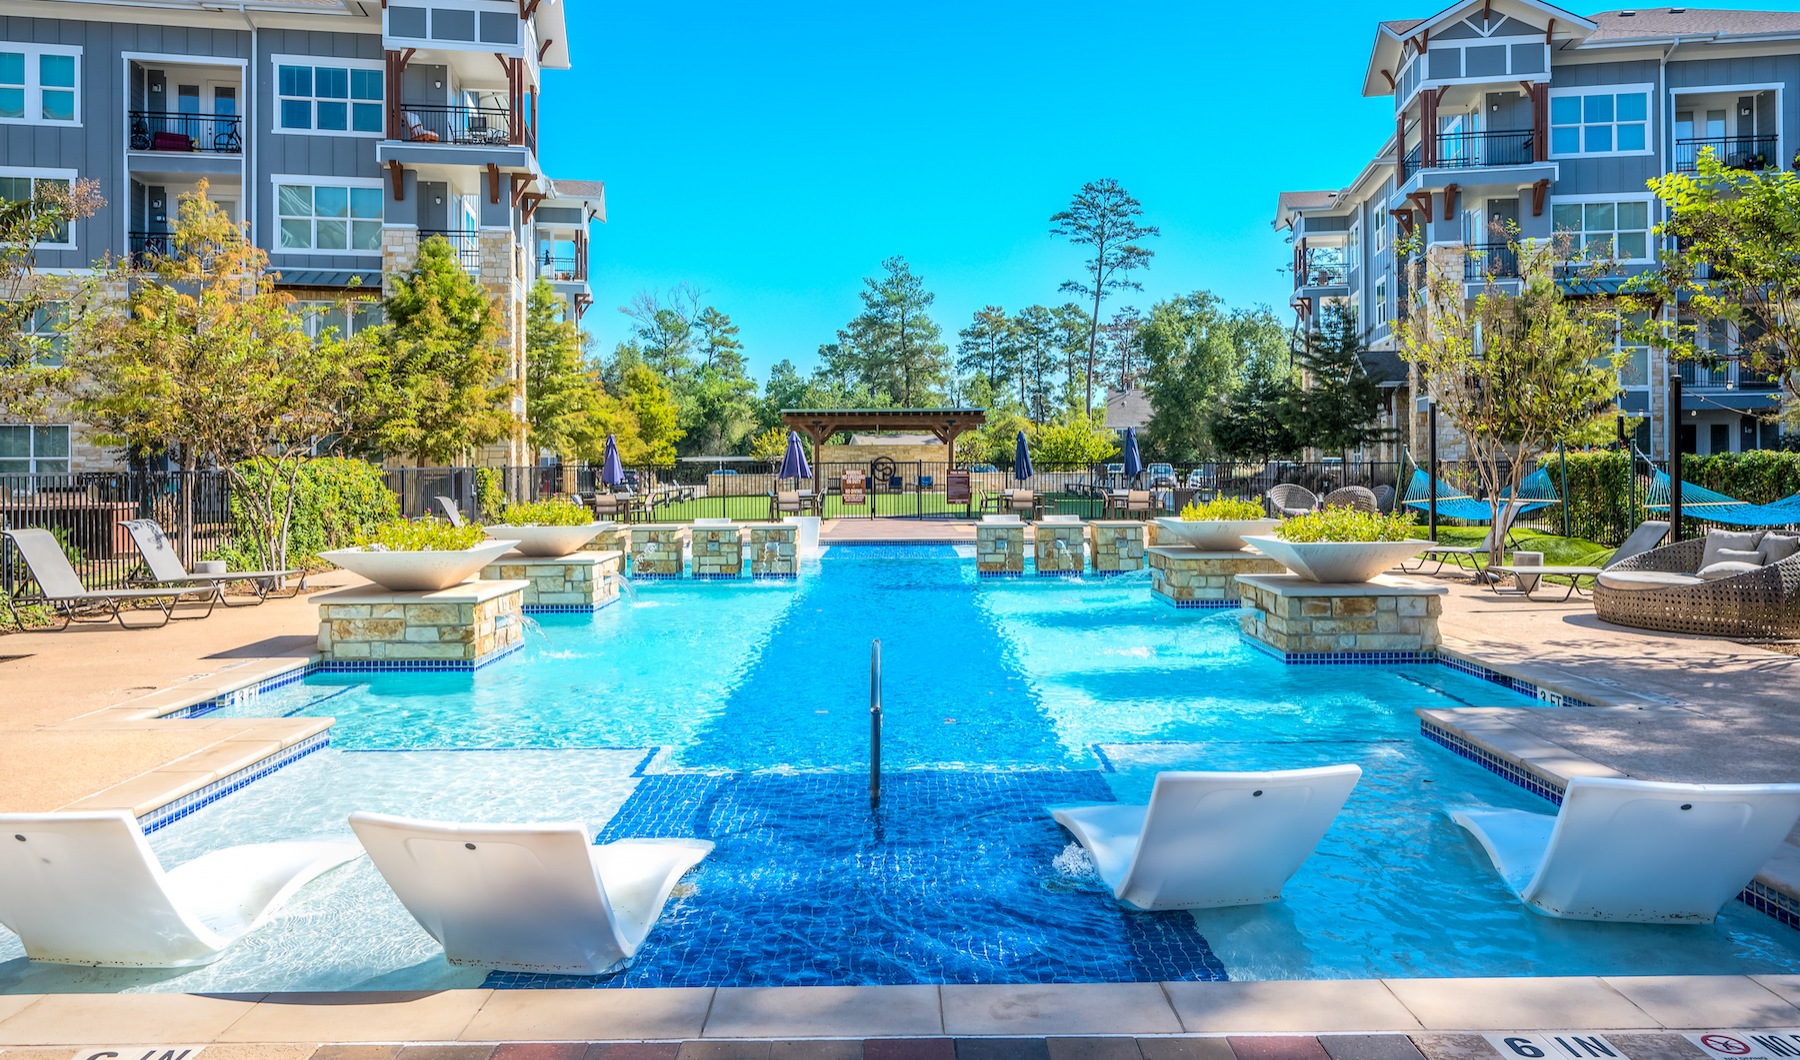 Large sparkling blue pool with a large deck and lounge chairs 